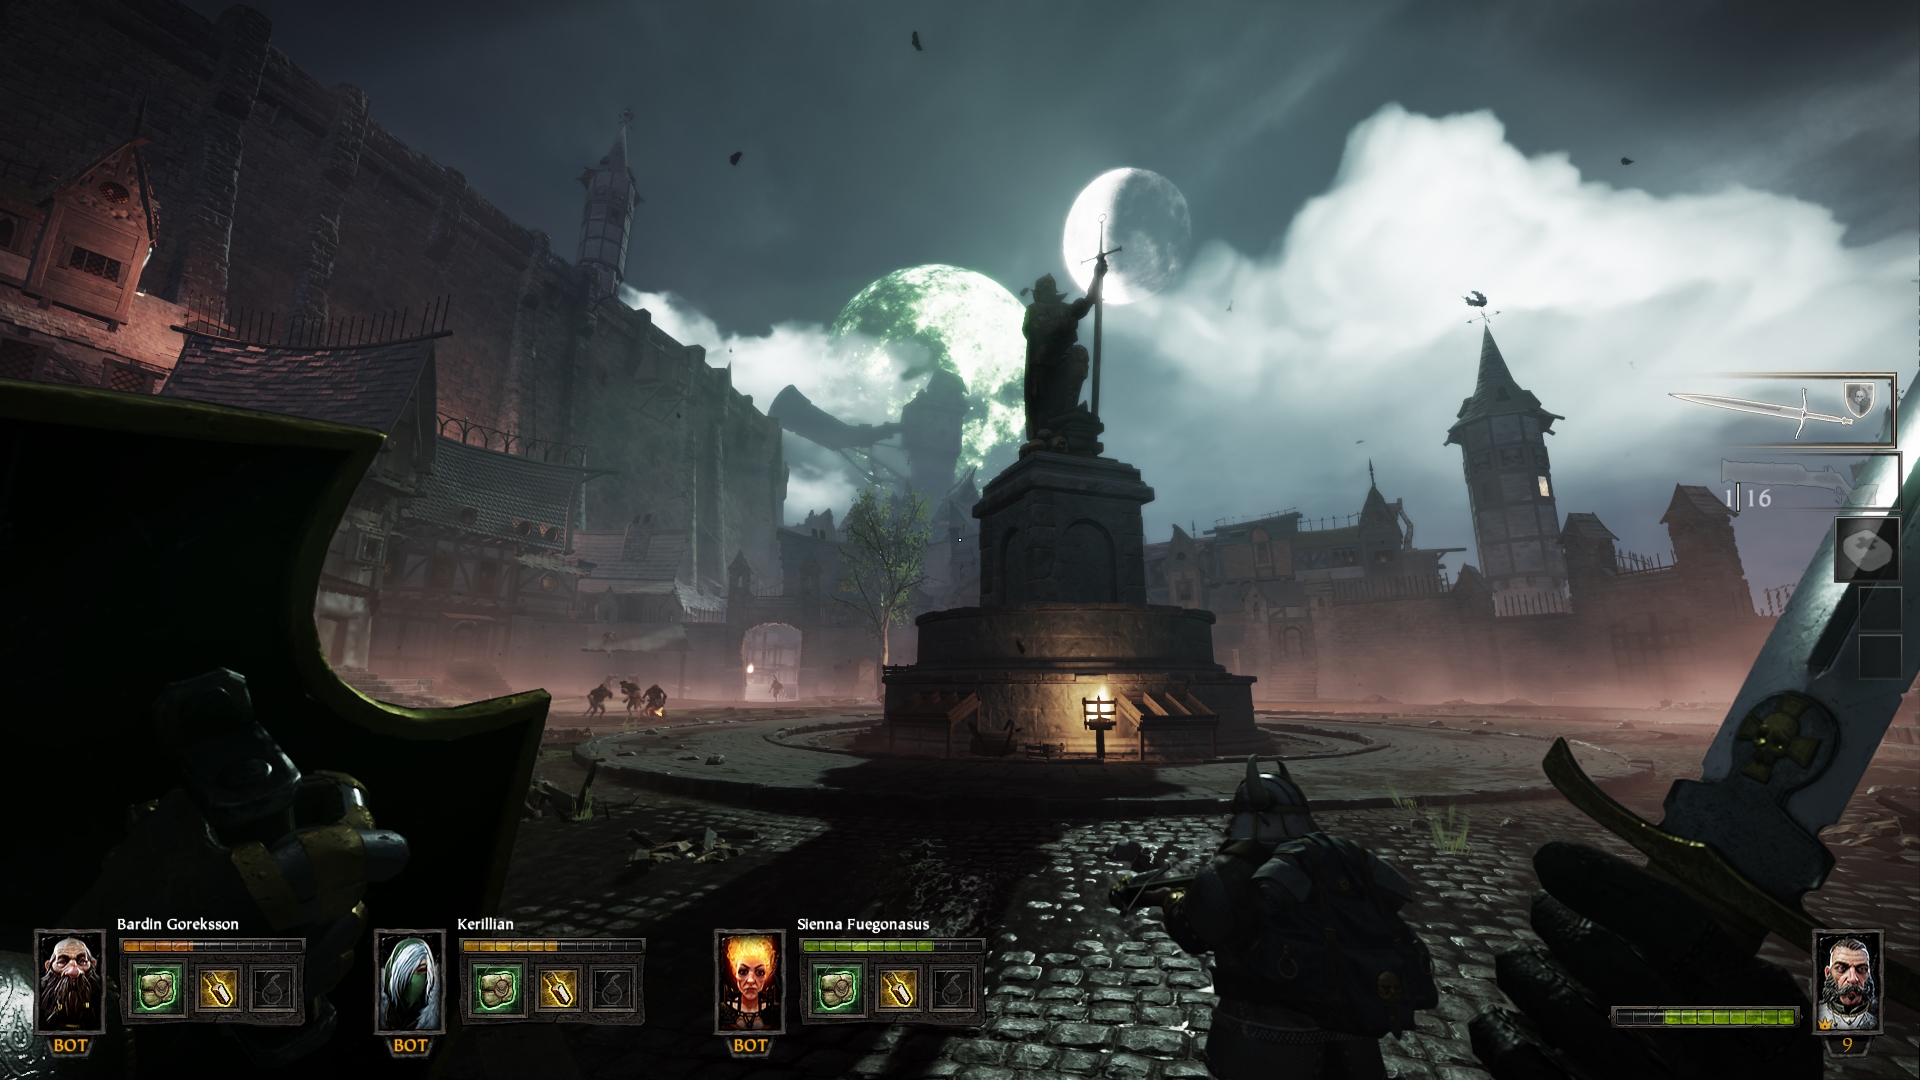 Lore rich locations await players in Vermintide